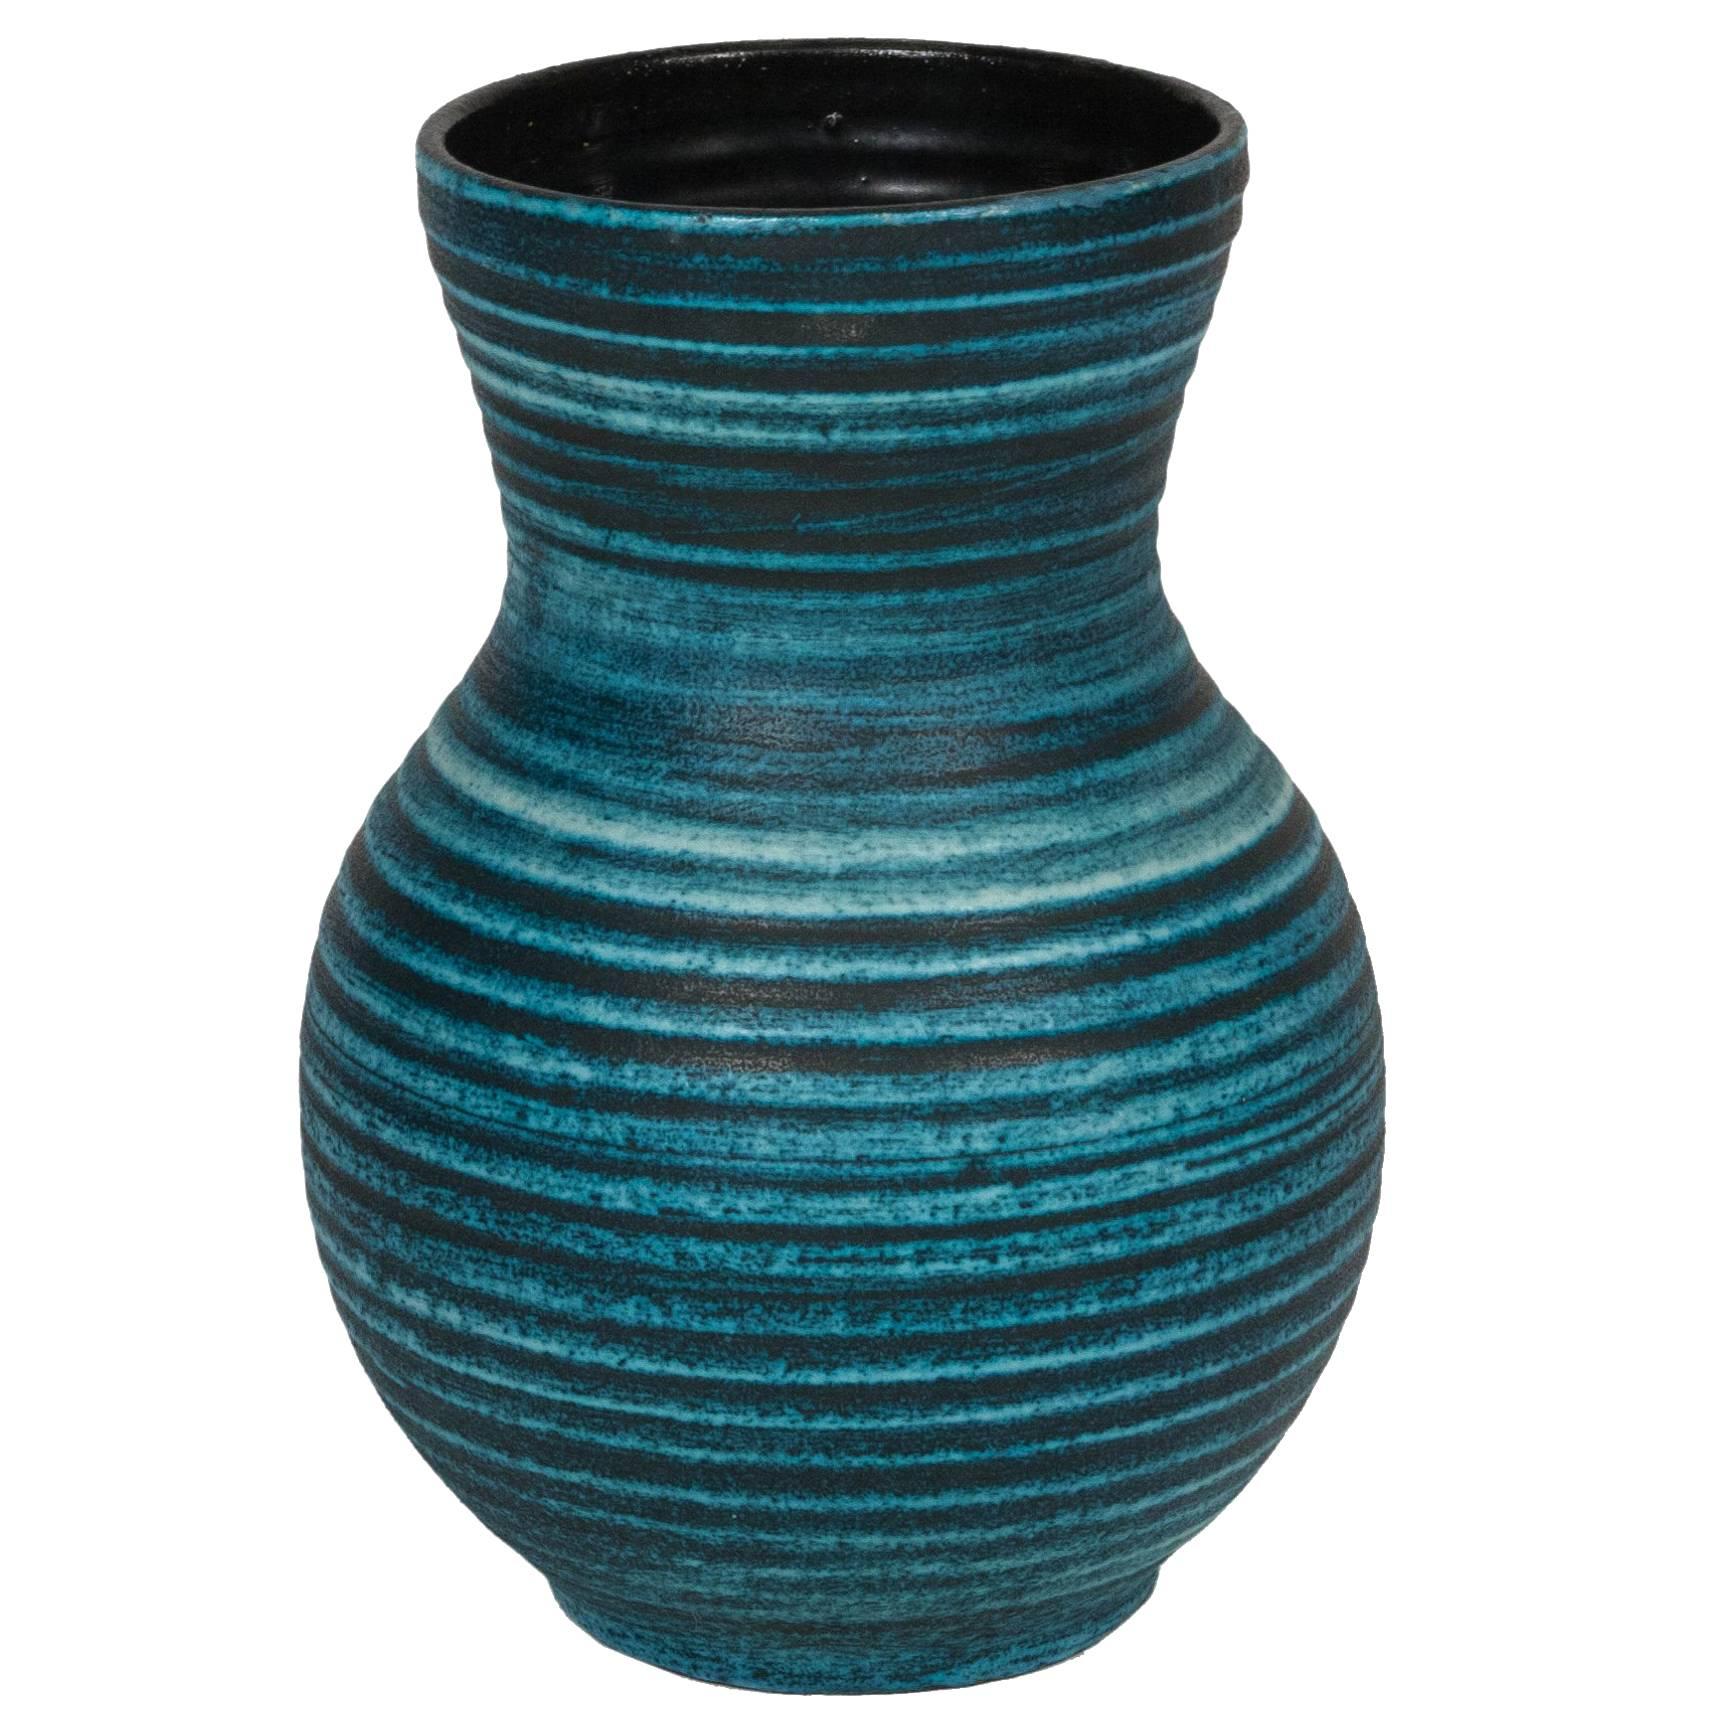 Blue Banded Ceramic Vase by Accolay, French, 1960s For Sale